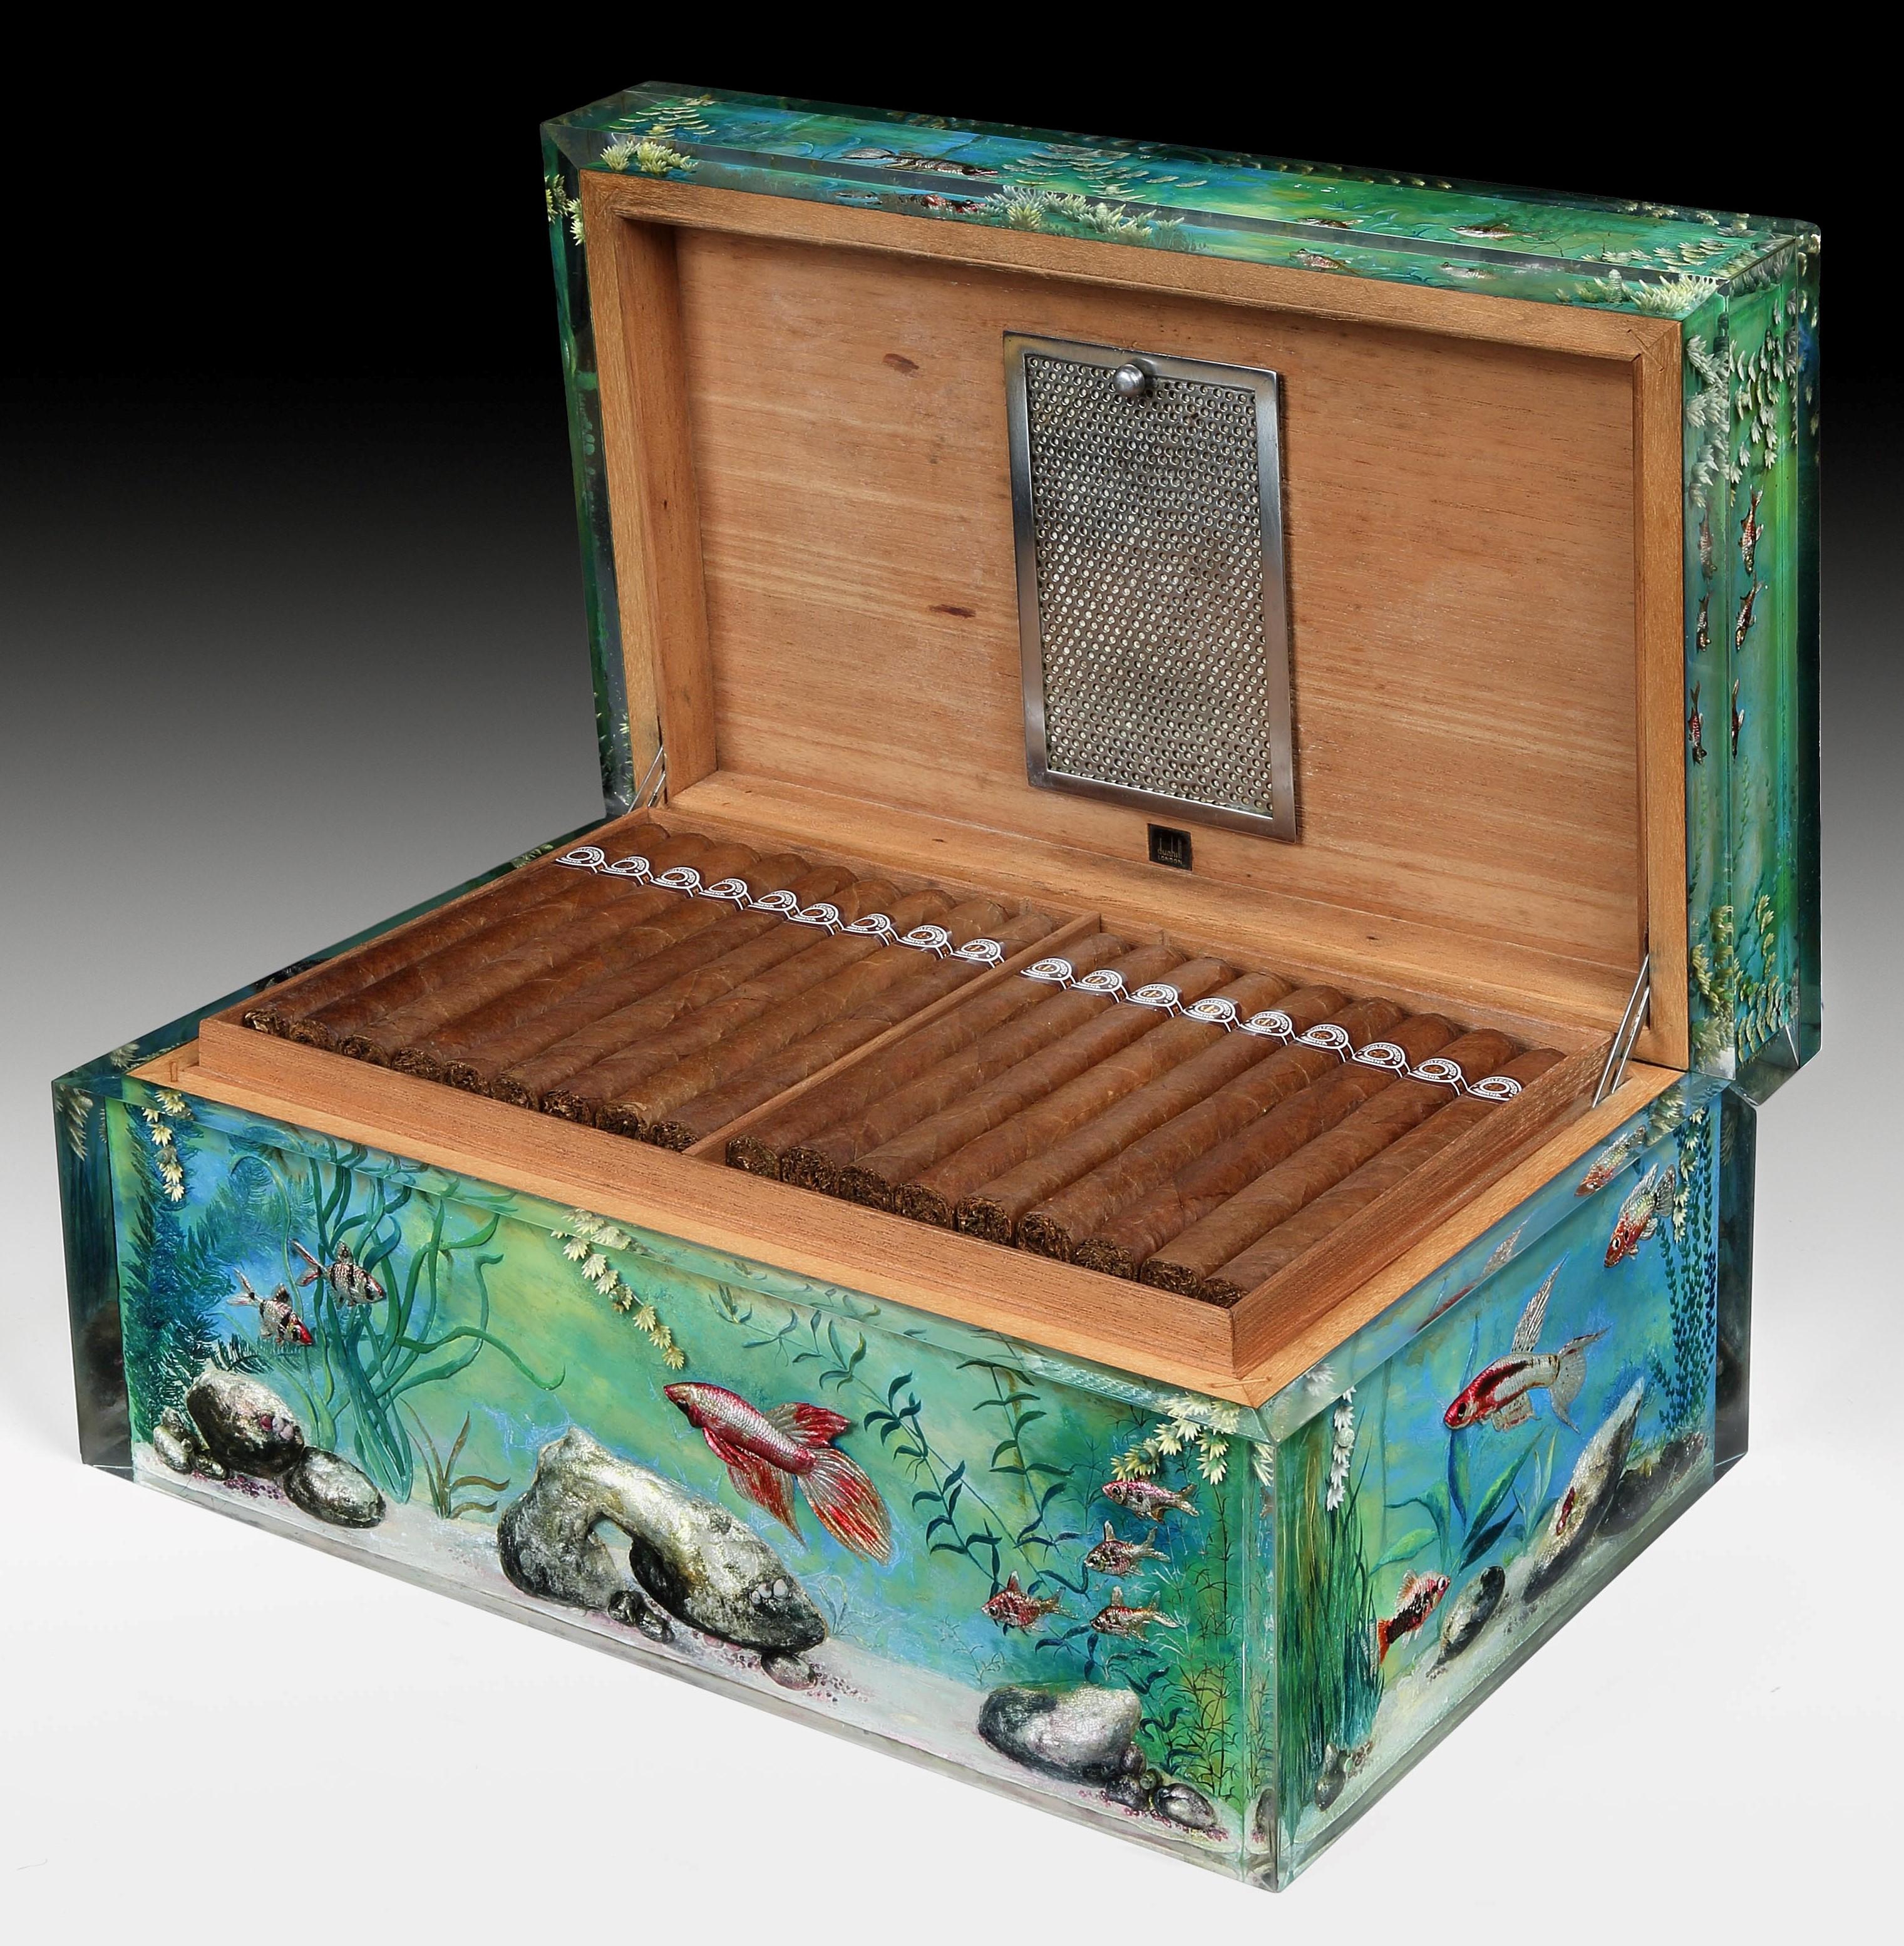 Alfred Dunhill, London

Of superlative quality and scale, this Aquarium humidor is the first of its kind that we have owned or indeed seen. A beautifully painted special-order collaboration between Ben Shillingford, the craftsman behind the